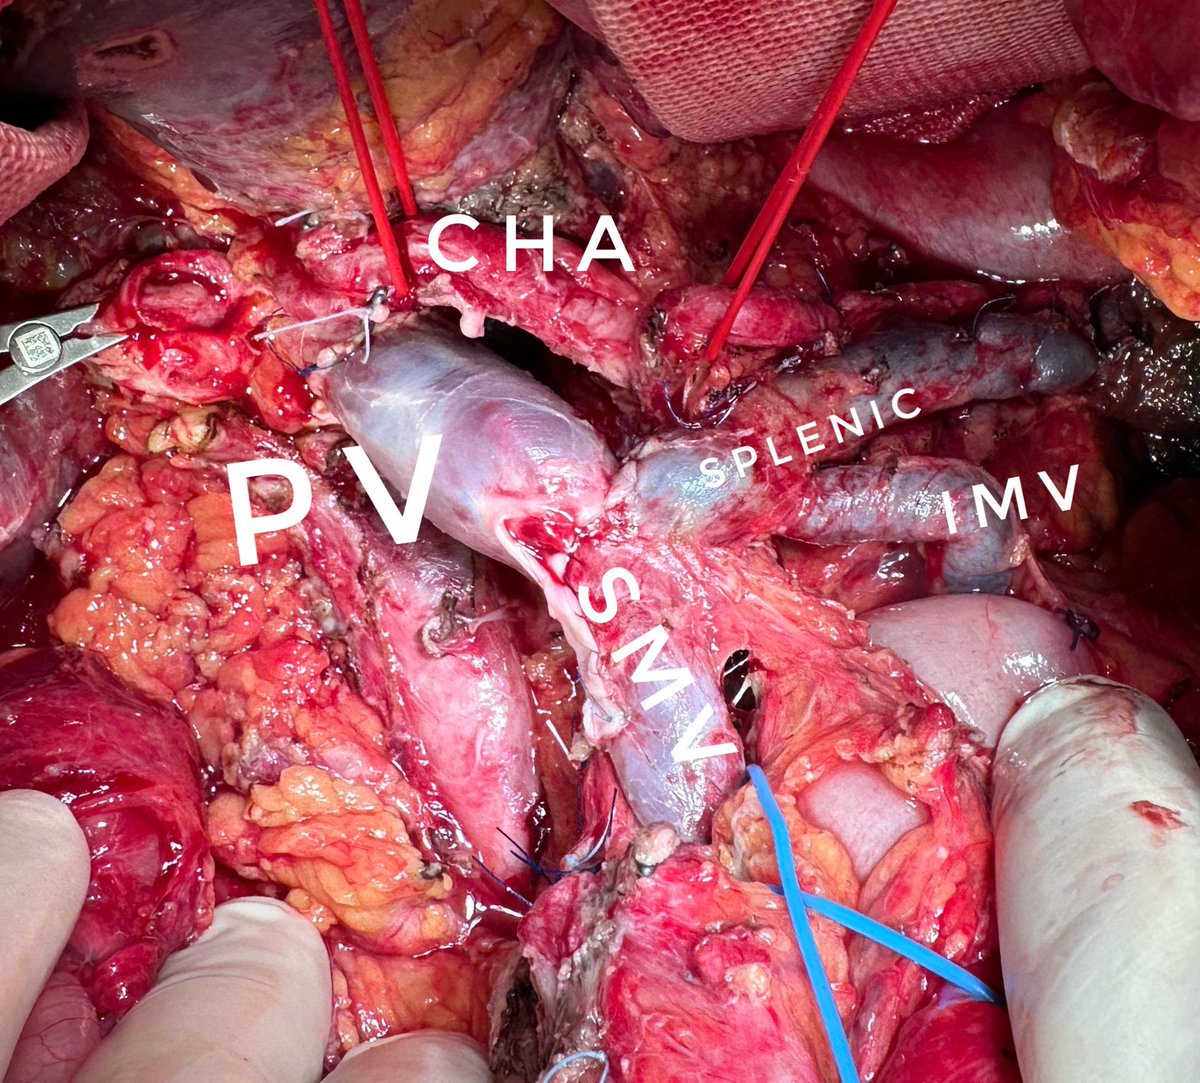 Pancreas surgery meets 🤝 Transplant surgery when it comes to vascular resections in PDAC 

🚨 LAPC involving CHA and PV

💉 Folfirinox x12 radiological / biological response + fit for surgery 

🌽 CHA divestment 
🧞‍♂️ PV resected + 10 cm graft allogenic cadaveric vein